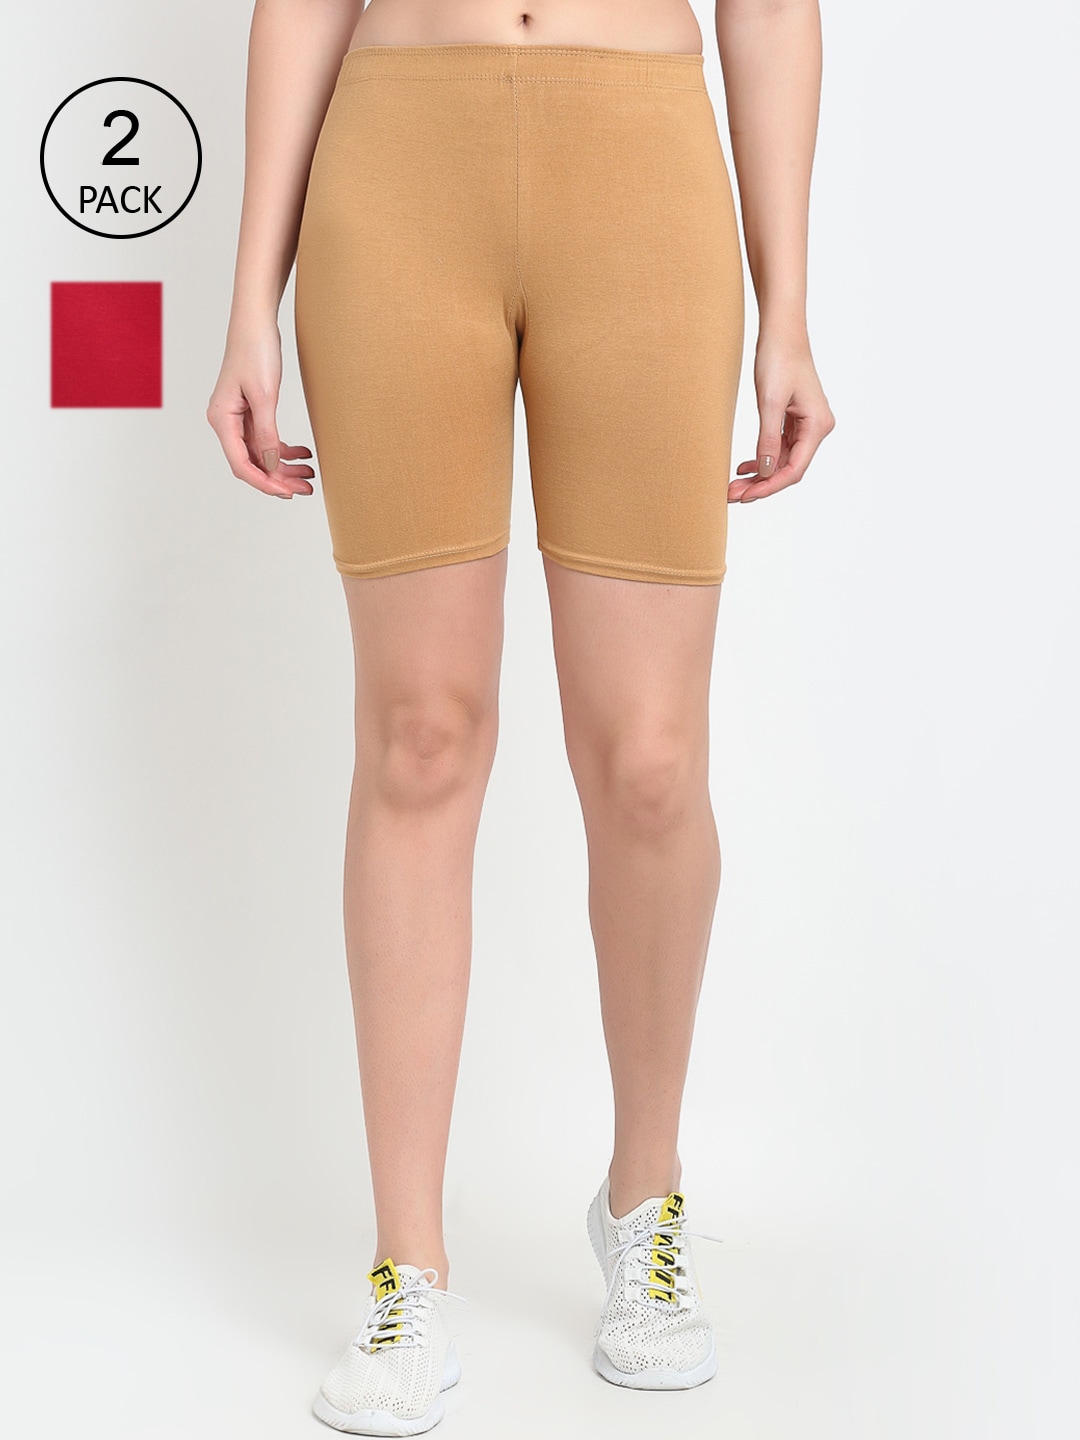 GRACIT Women Beige and Red Pack of 2 Cycling Shorts Price in India